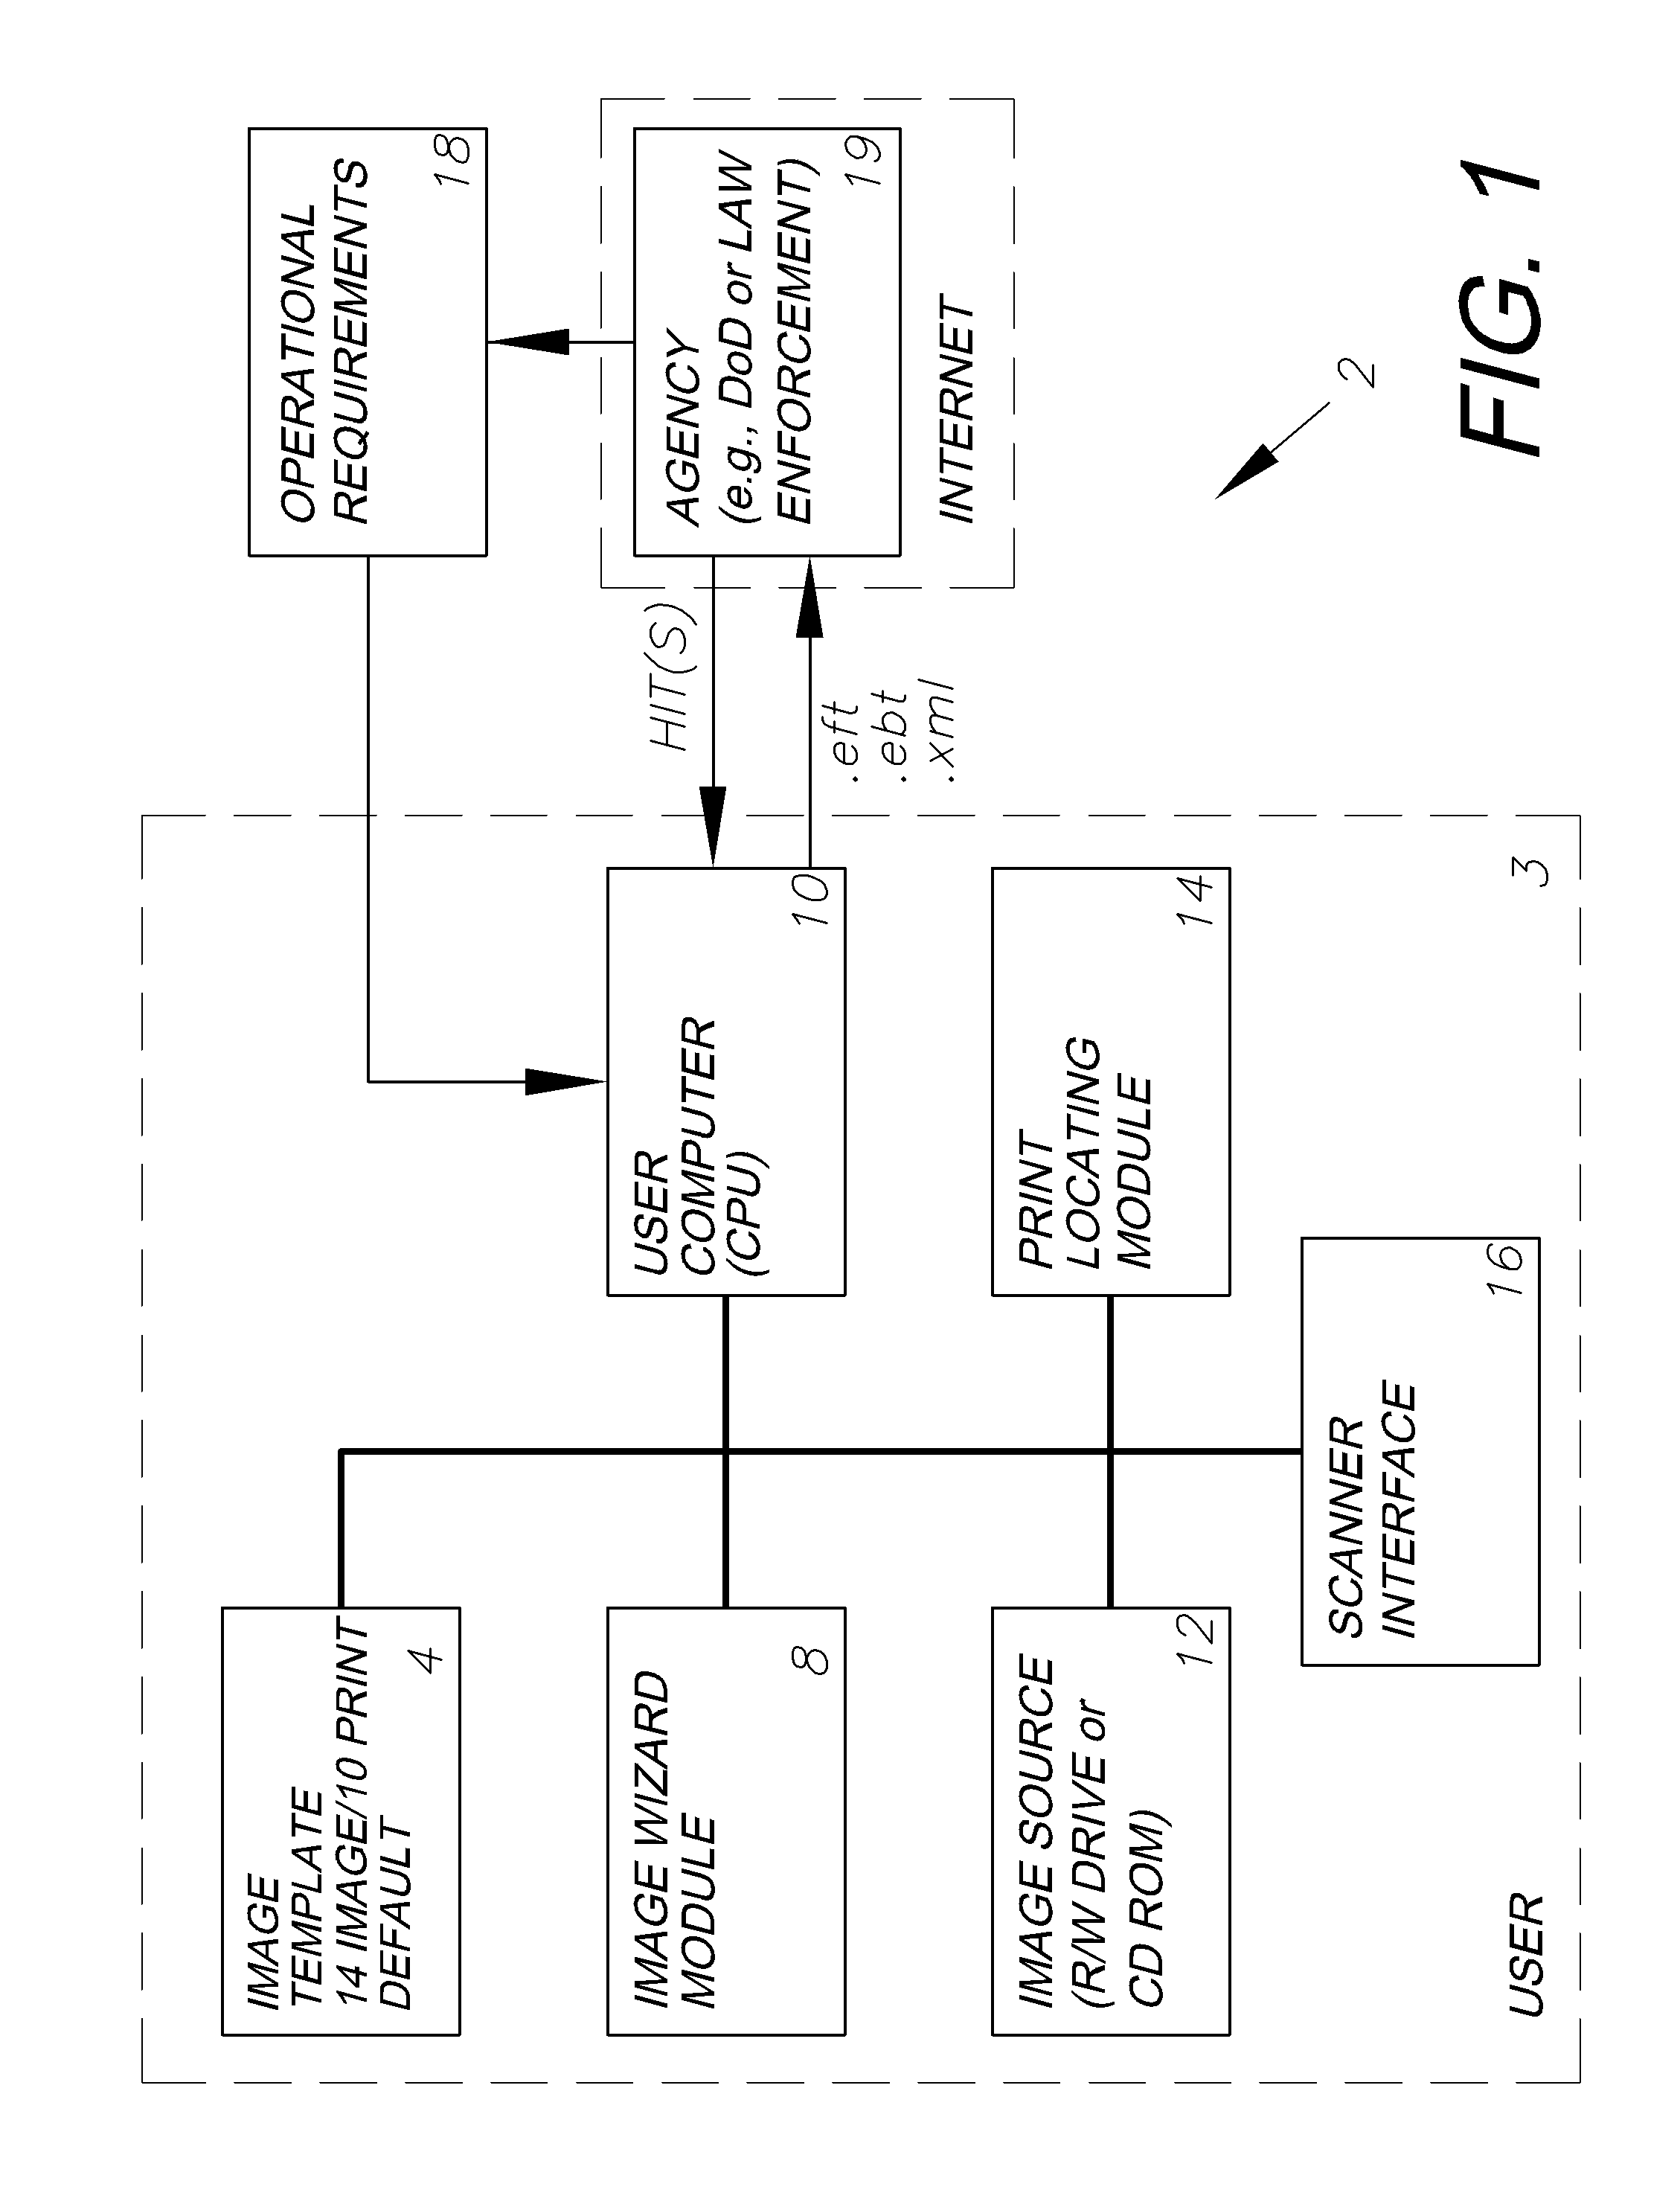 Automated biometric identification system (ABIS) and method